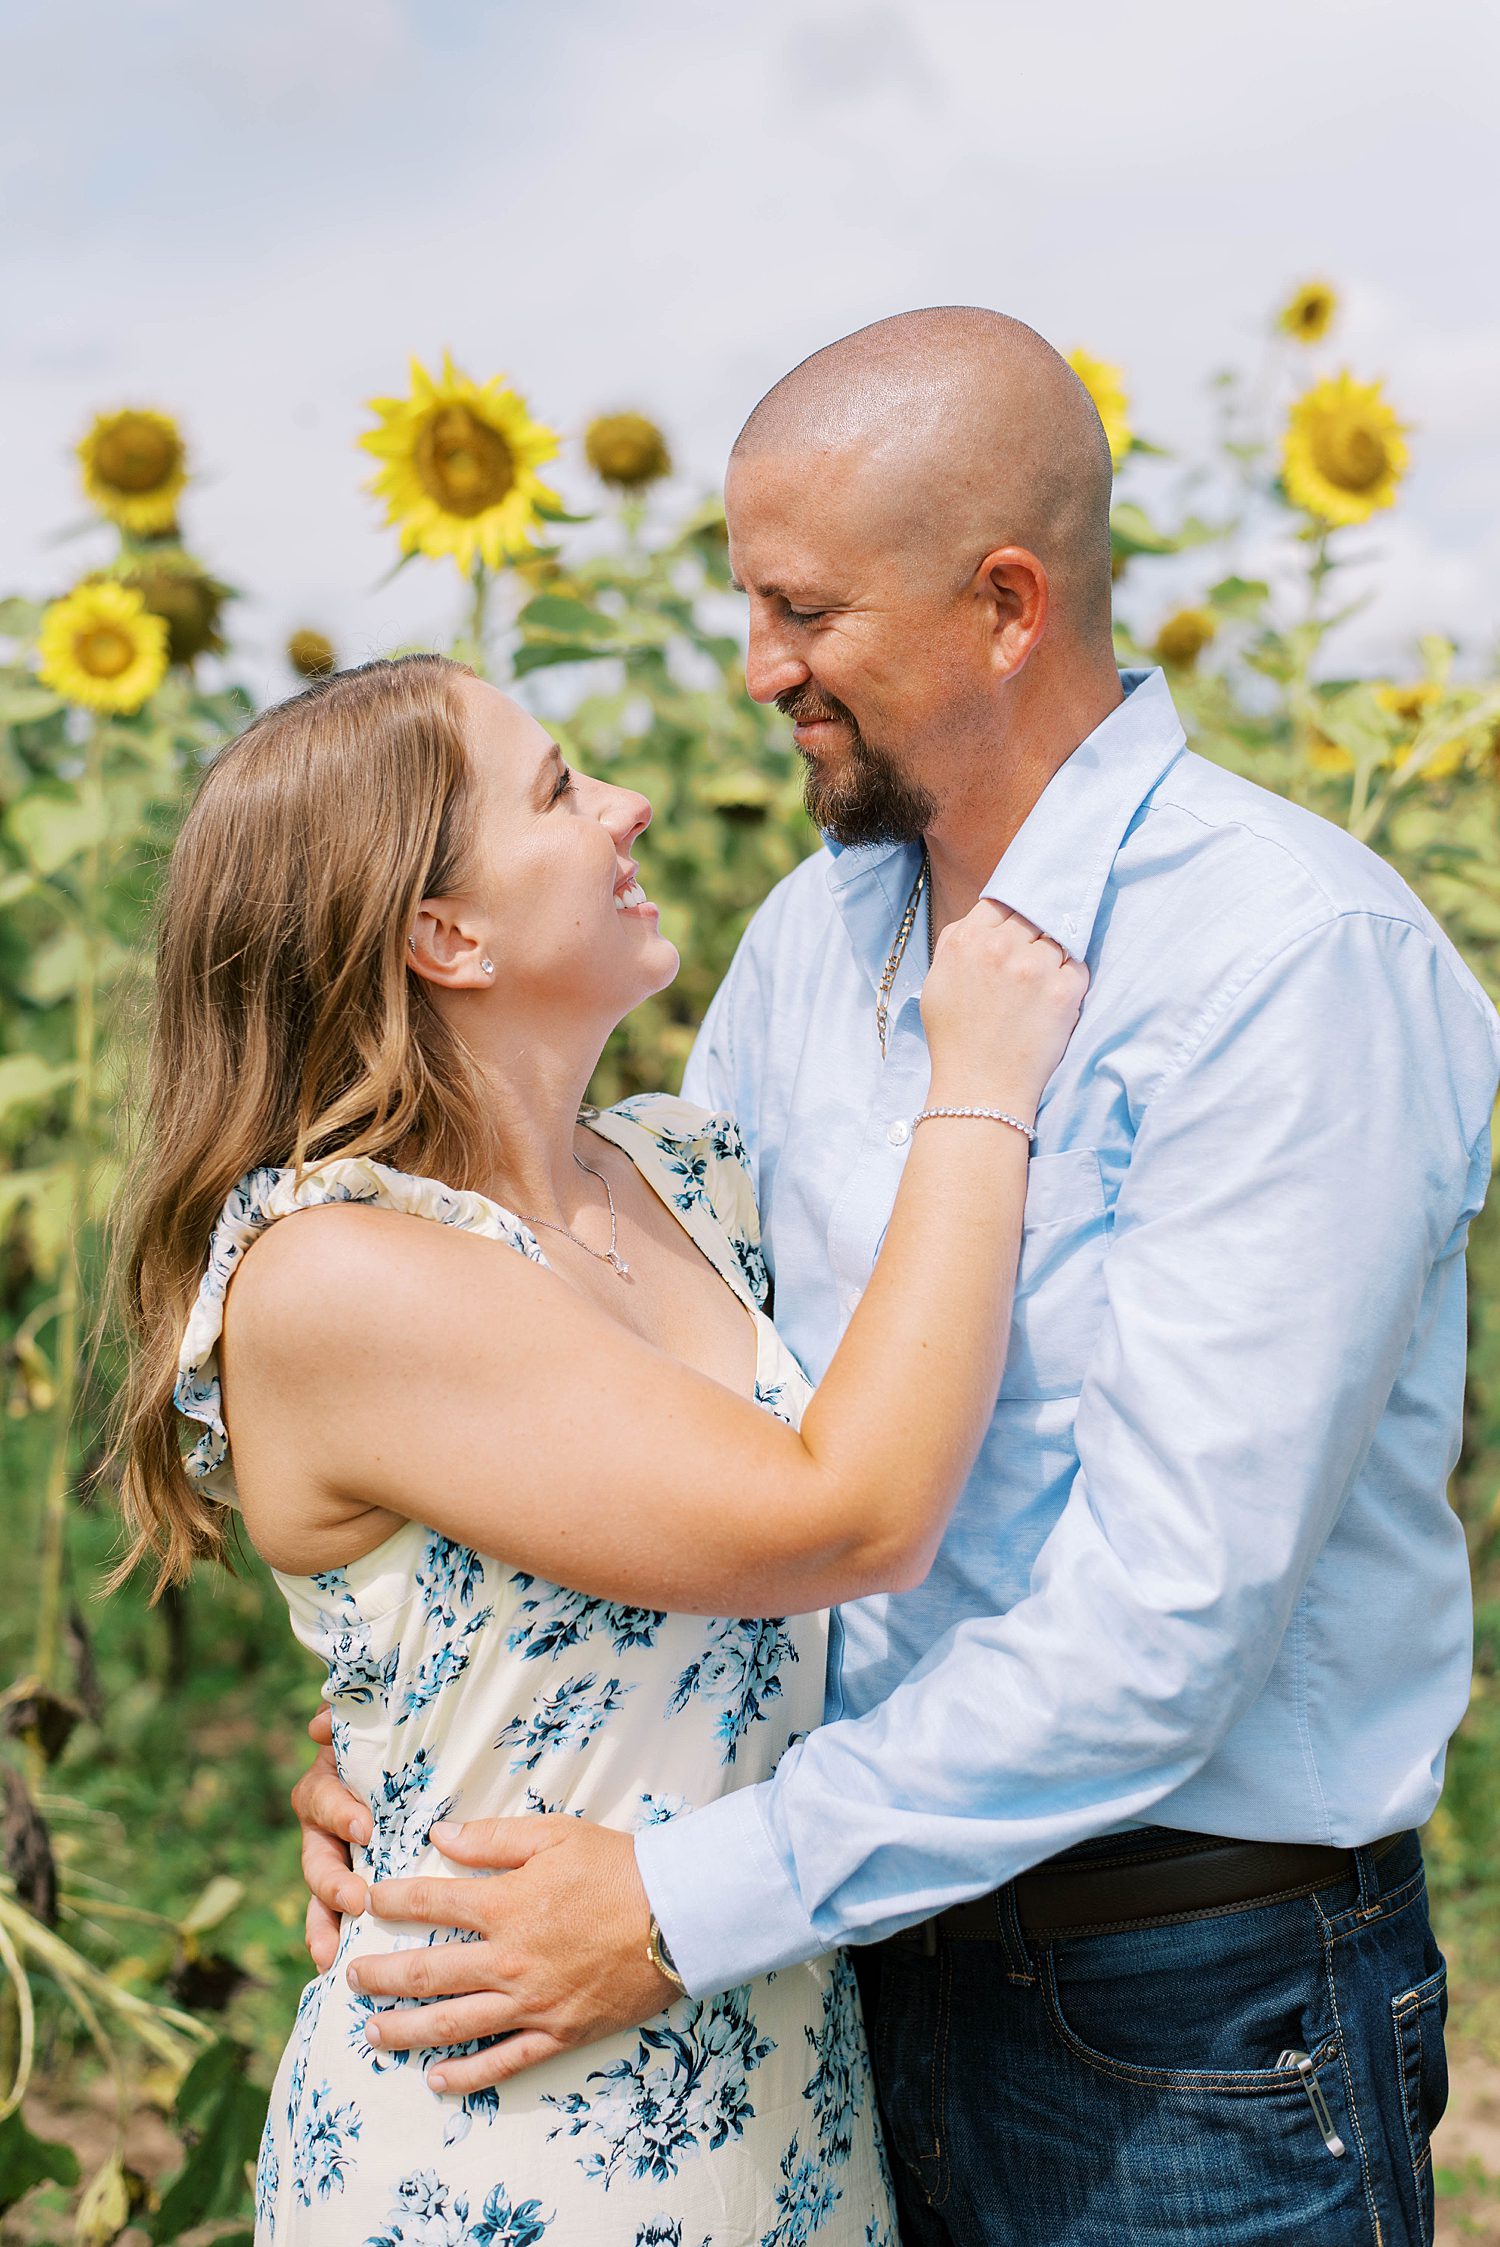 engaged couple smile together next to sunflowers 